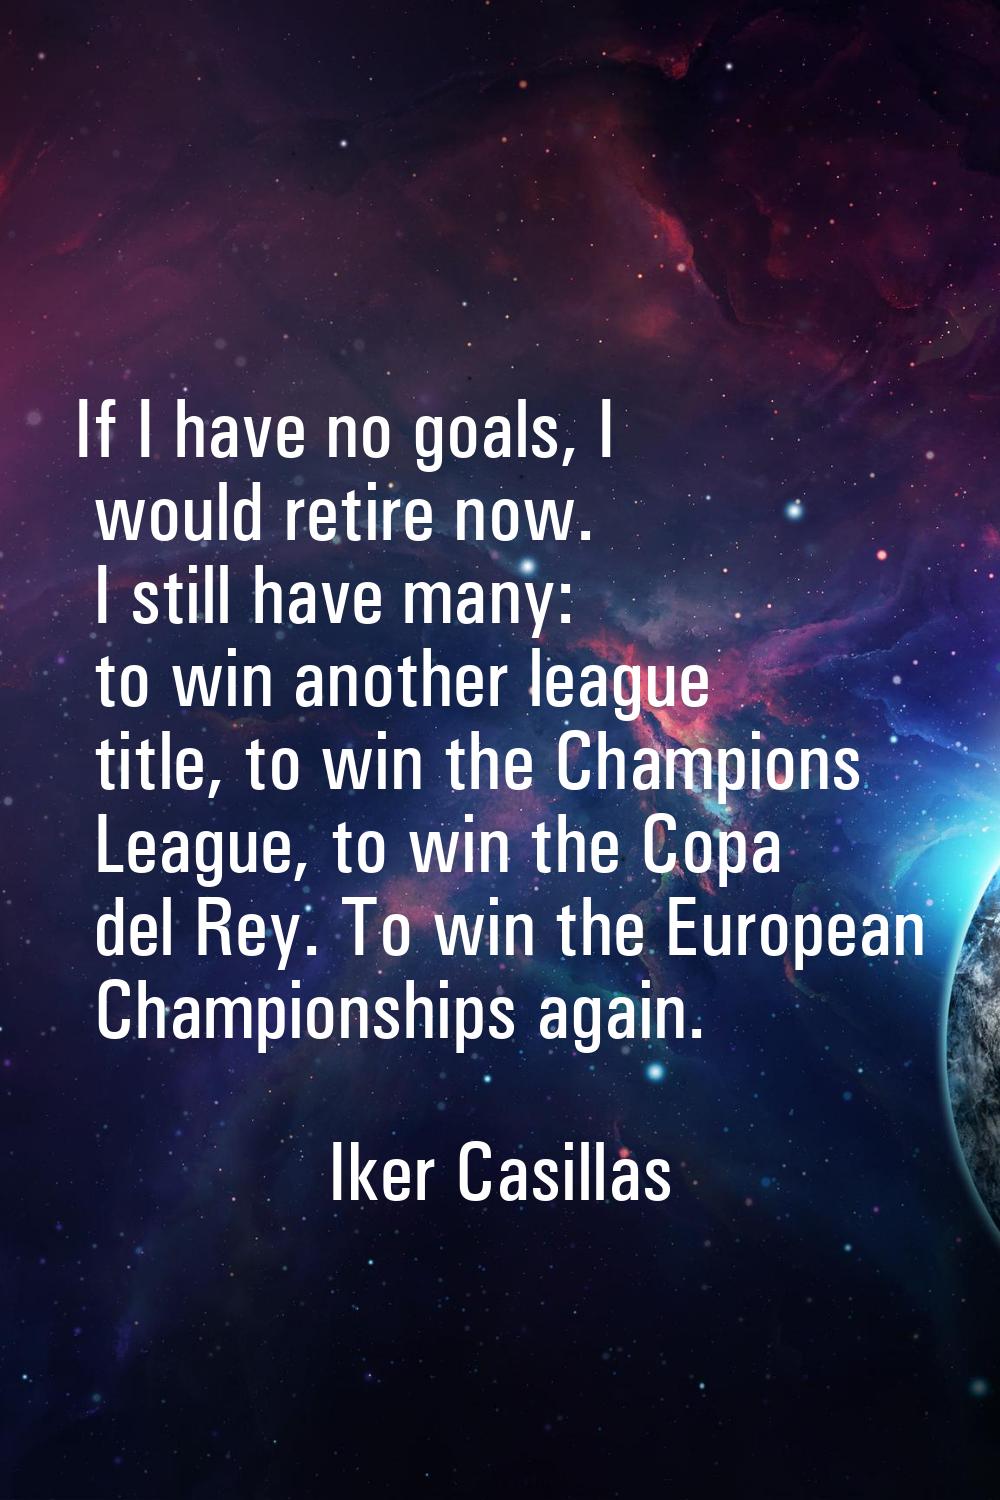 If I have no goals, I would retire now. I still have many: to win another league title, to win the 